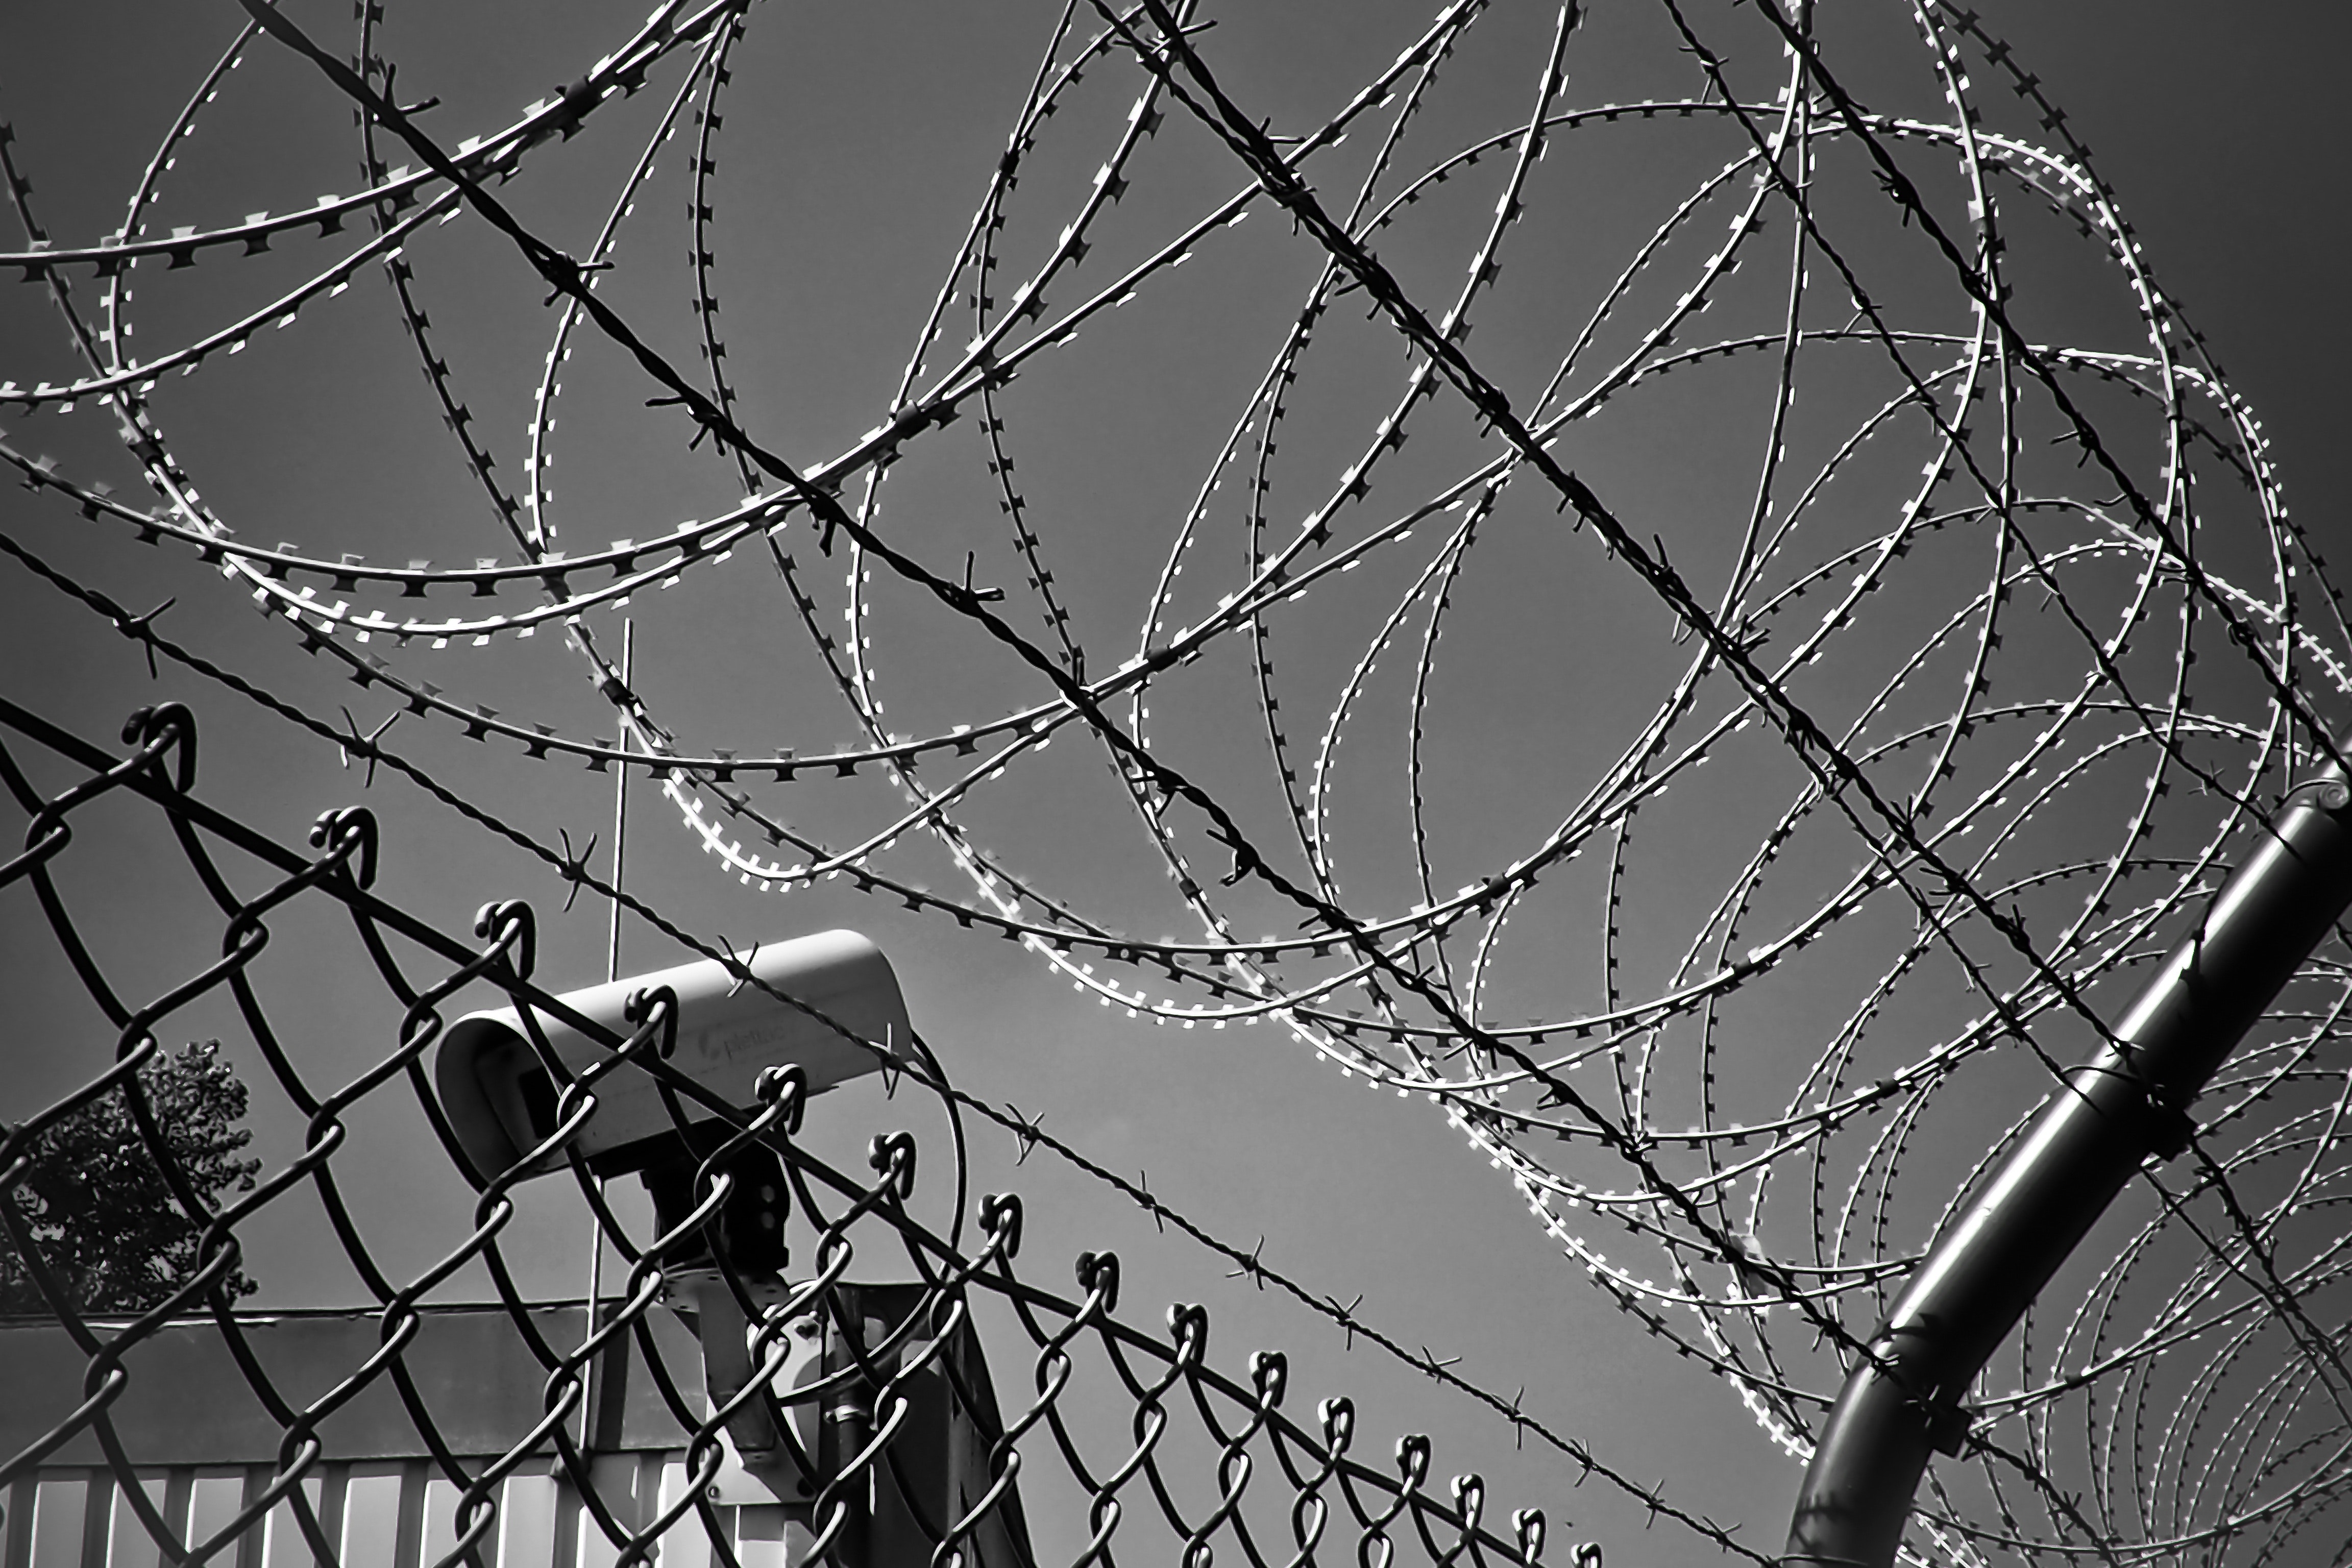 Black and white photograph of barbed wire on top of a metal fence